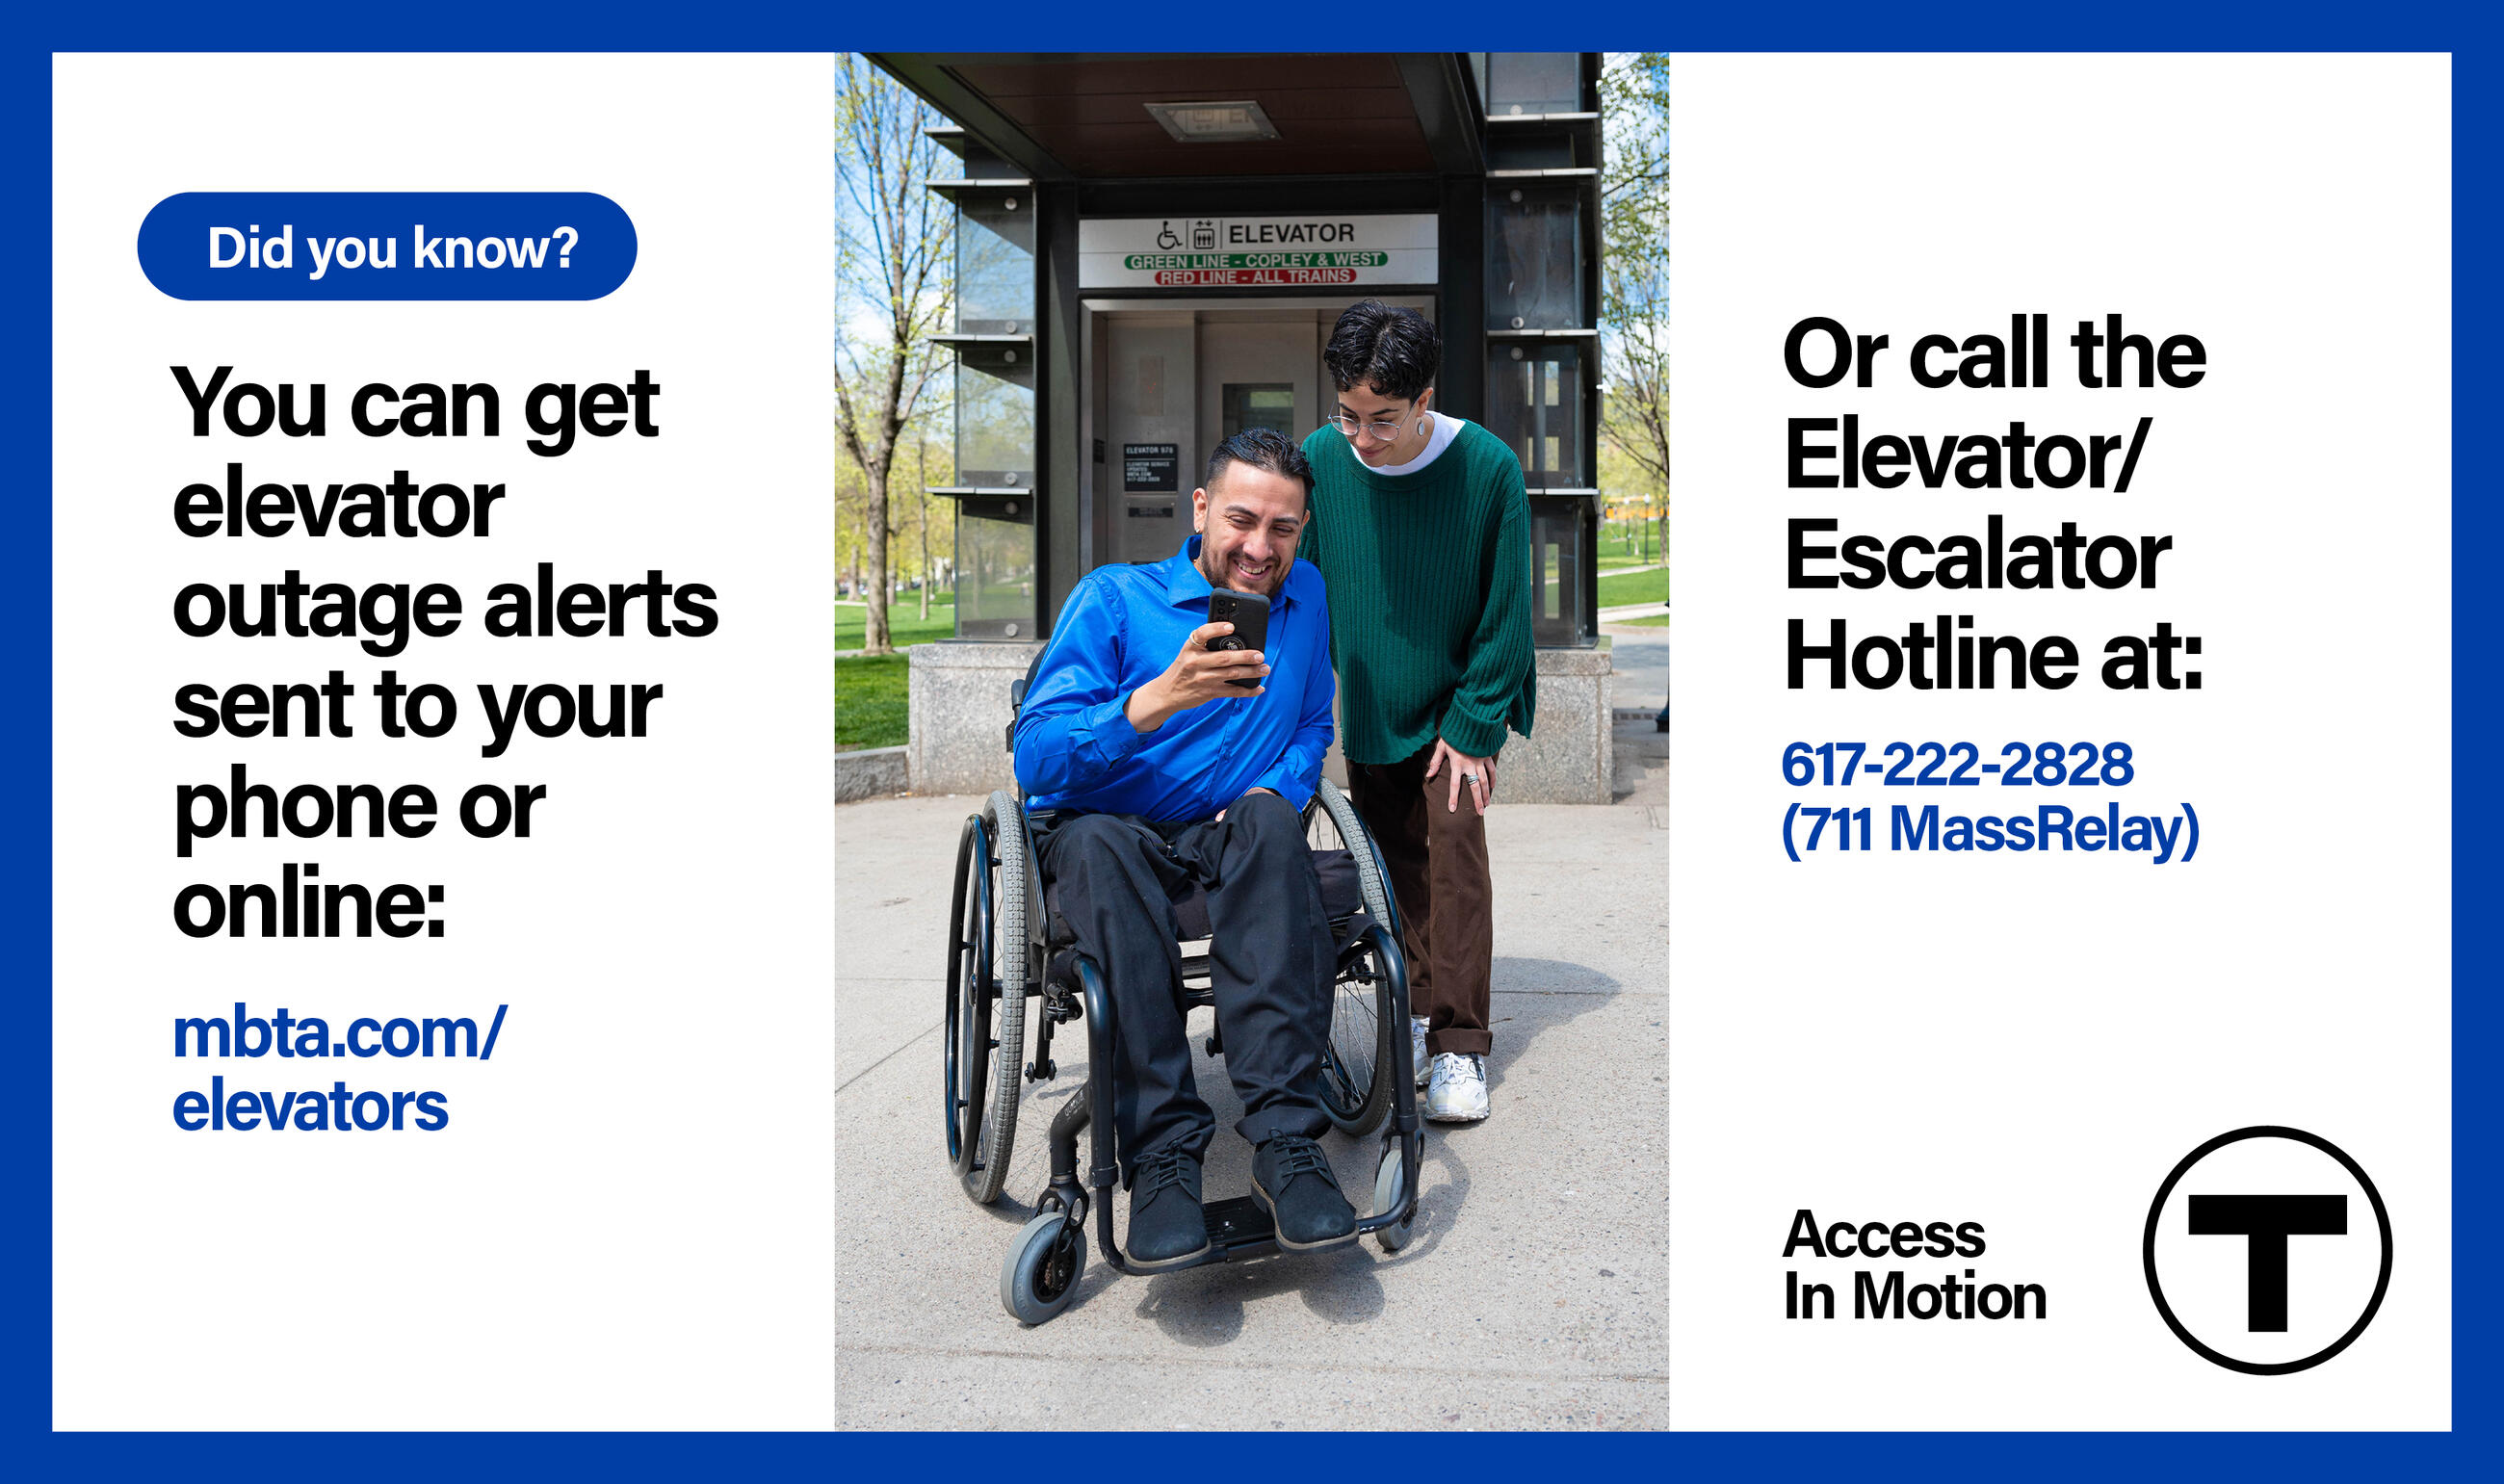 Center panel: In front of a street-level station elevator, a Latino man using a manual wheelchair and a white nonbinary person with a non-apparent disability look down at the man’s phone. Left panel (text): “Did you know? You can get elevator outage alerts sent to your phone or online: mbta.com/elevators.” Right panel (text): “Or call the Elevator/Escalator Hotline at: 617-222-2828 (711 MassRelay)” followed by the “Access In Motion” tagline and the T logo.